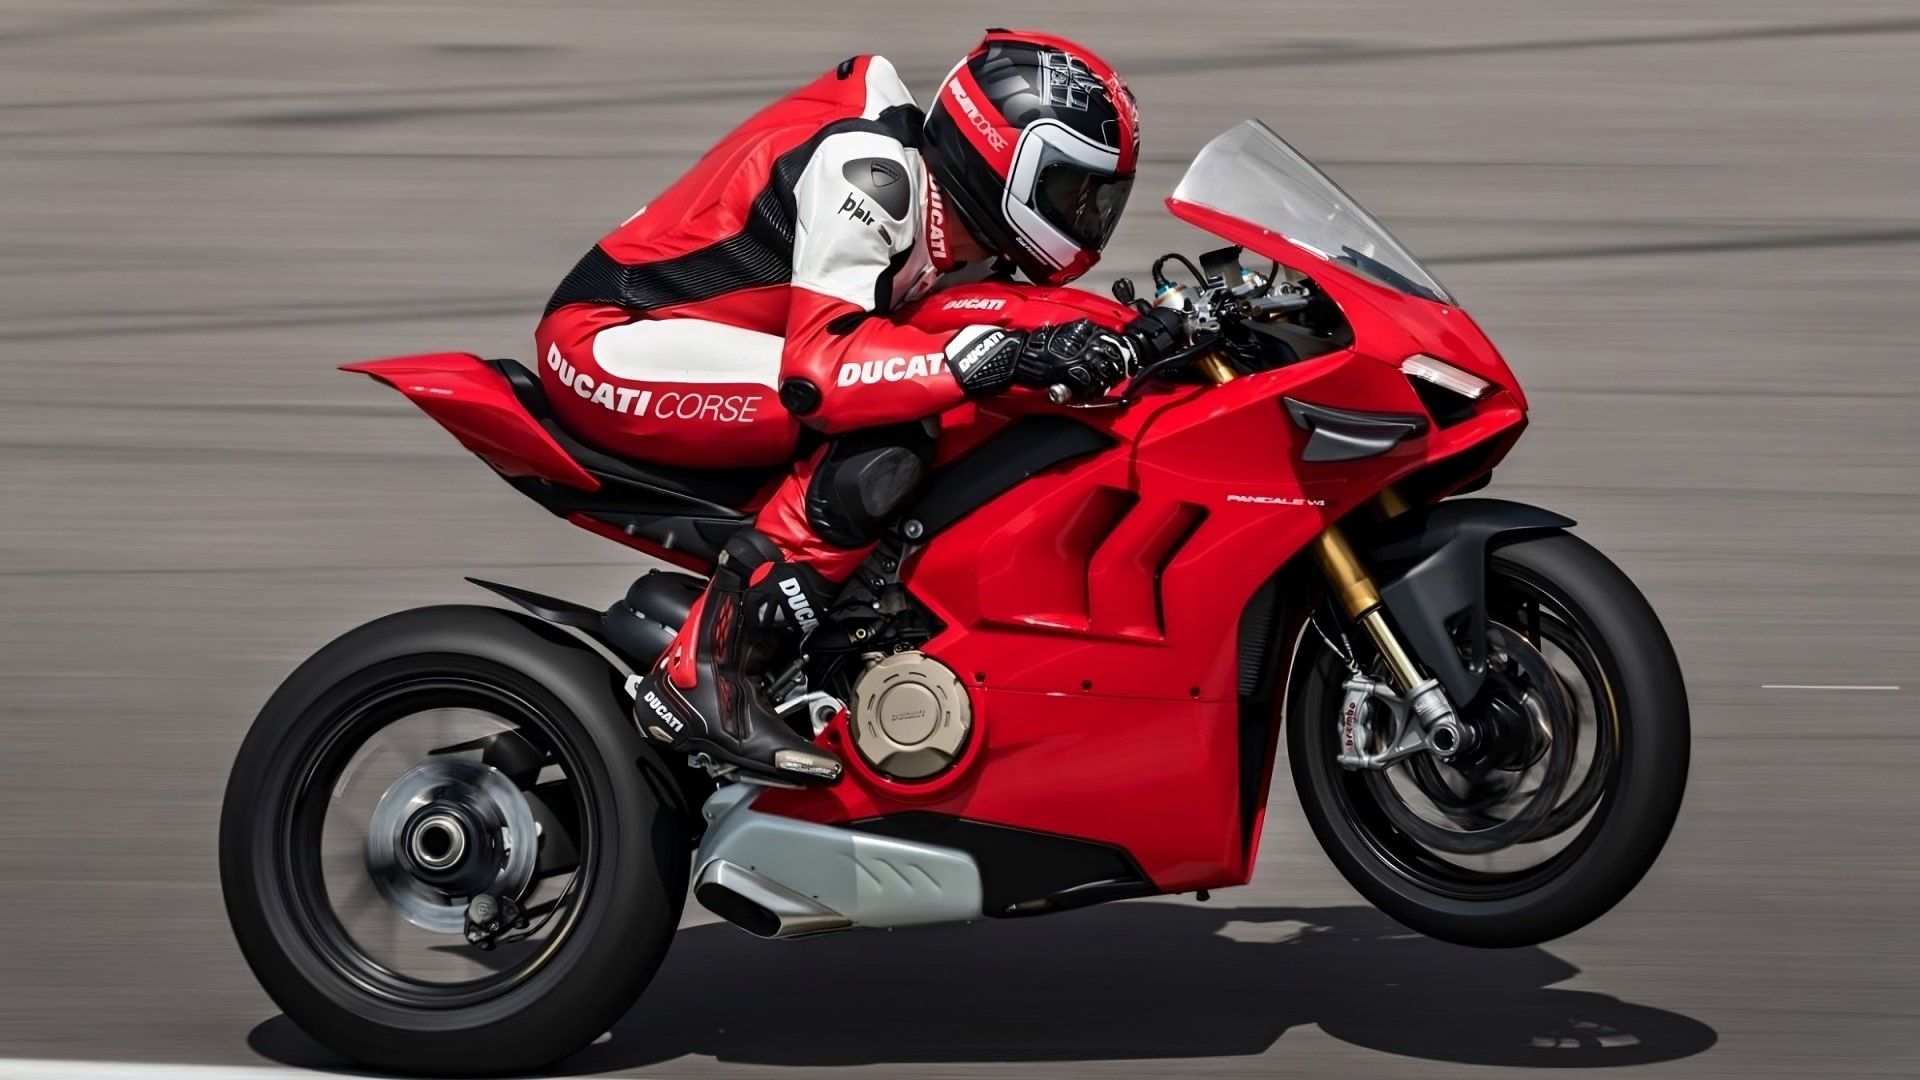 Ducati Panigale V4 S popping a wheelie side profile view